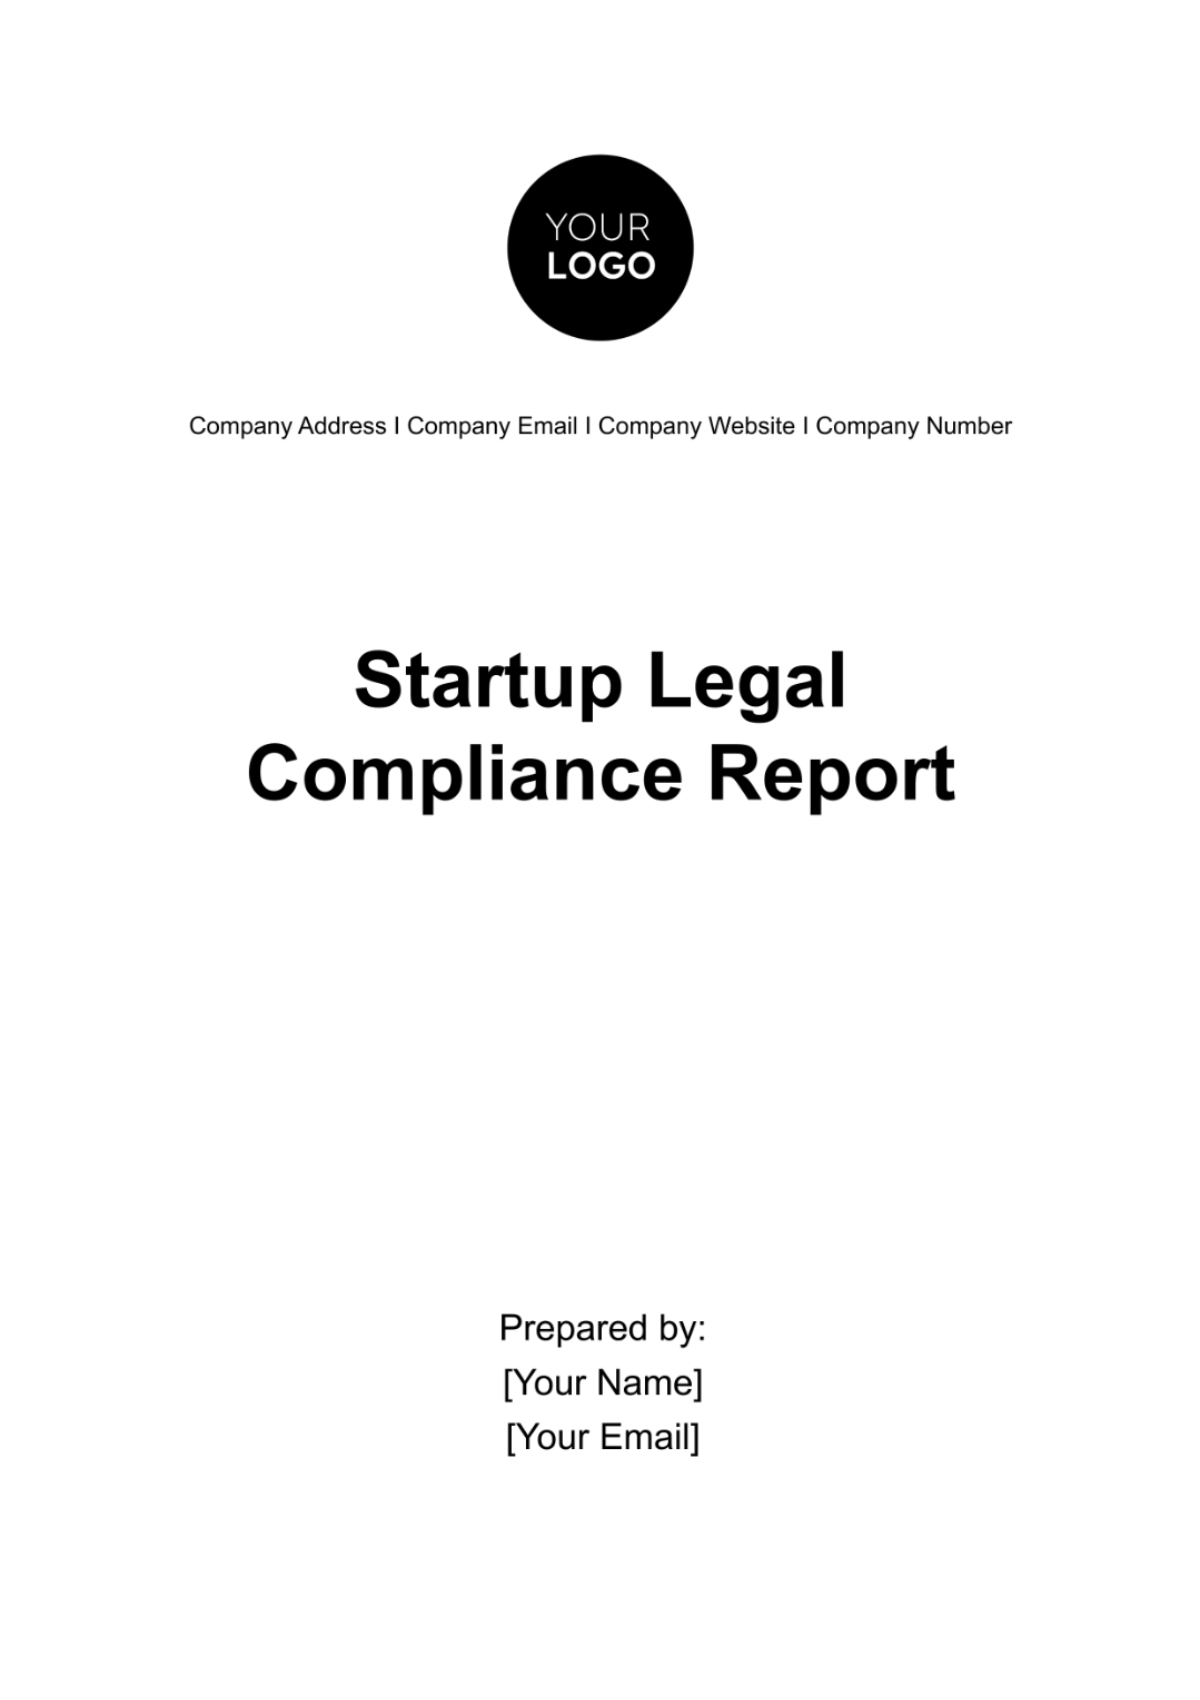 Startup Legal Compliance Report Template